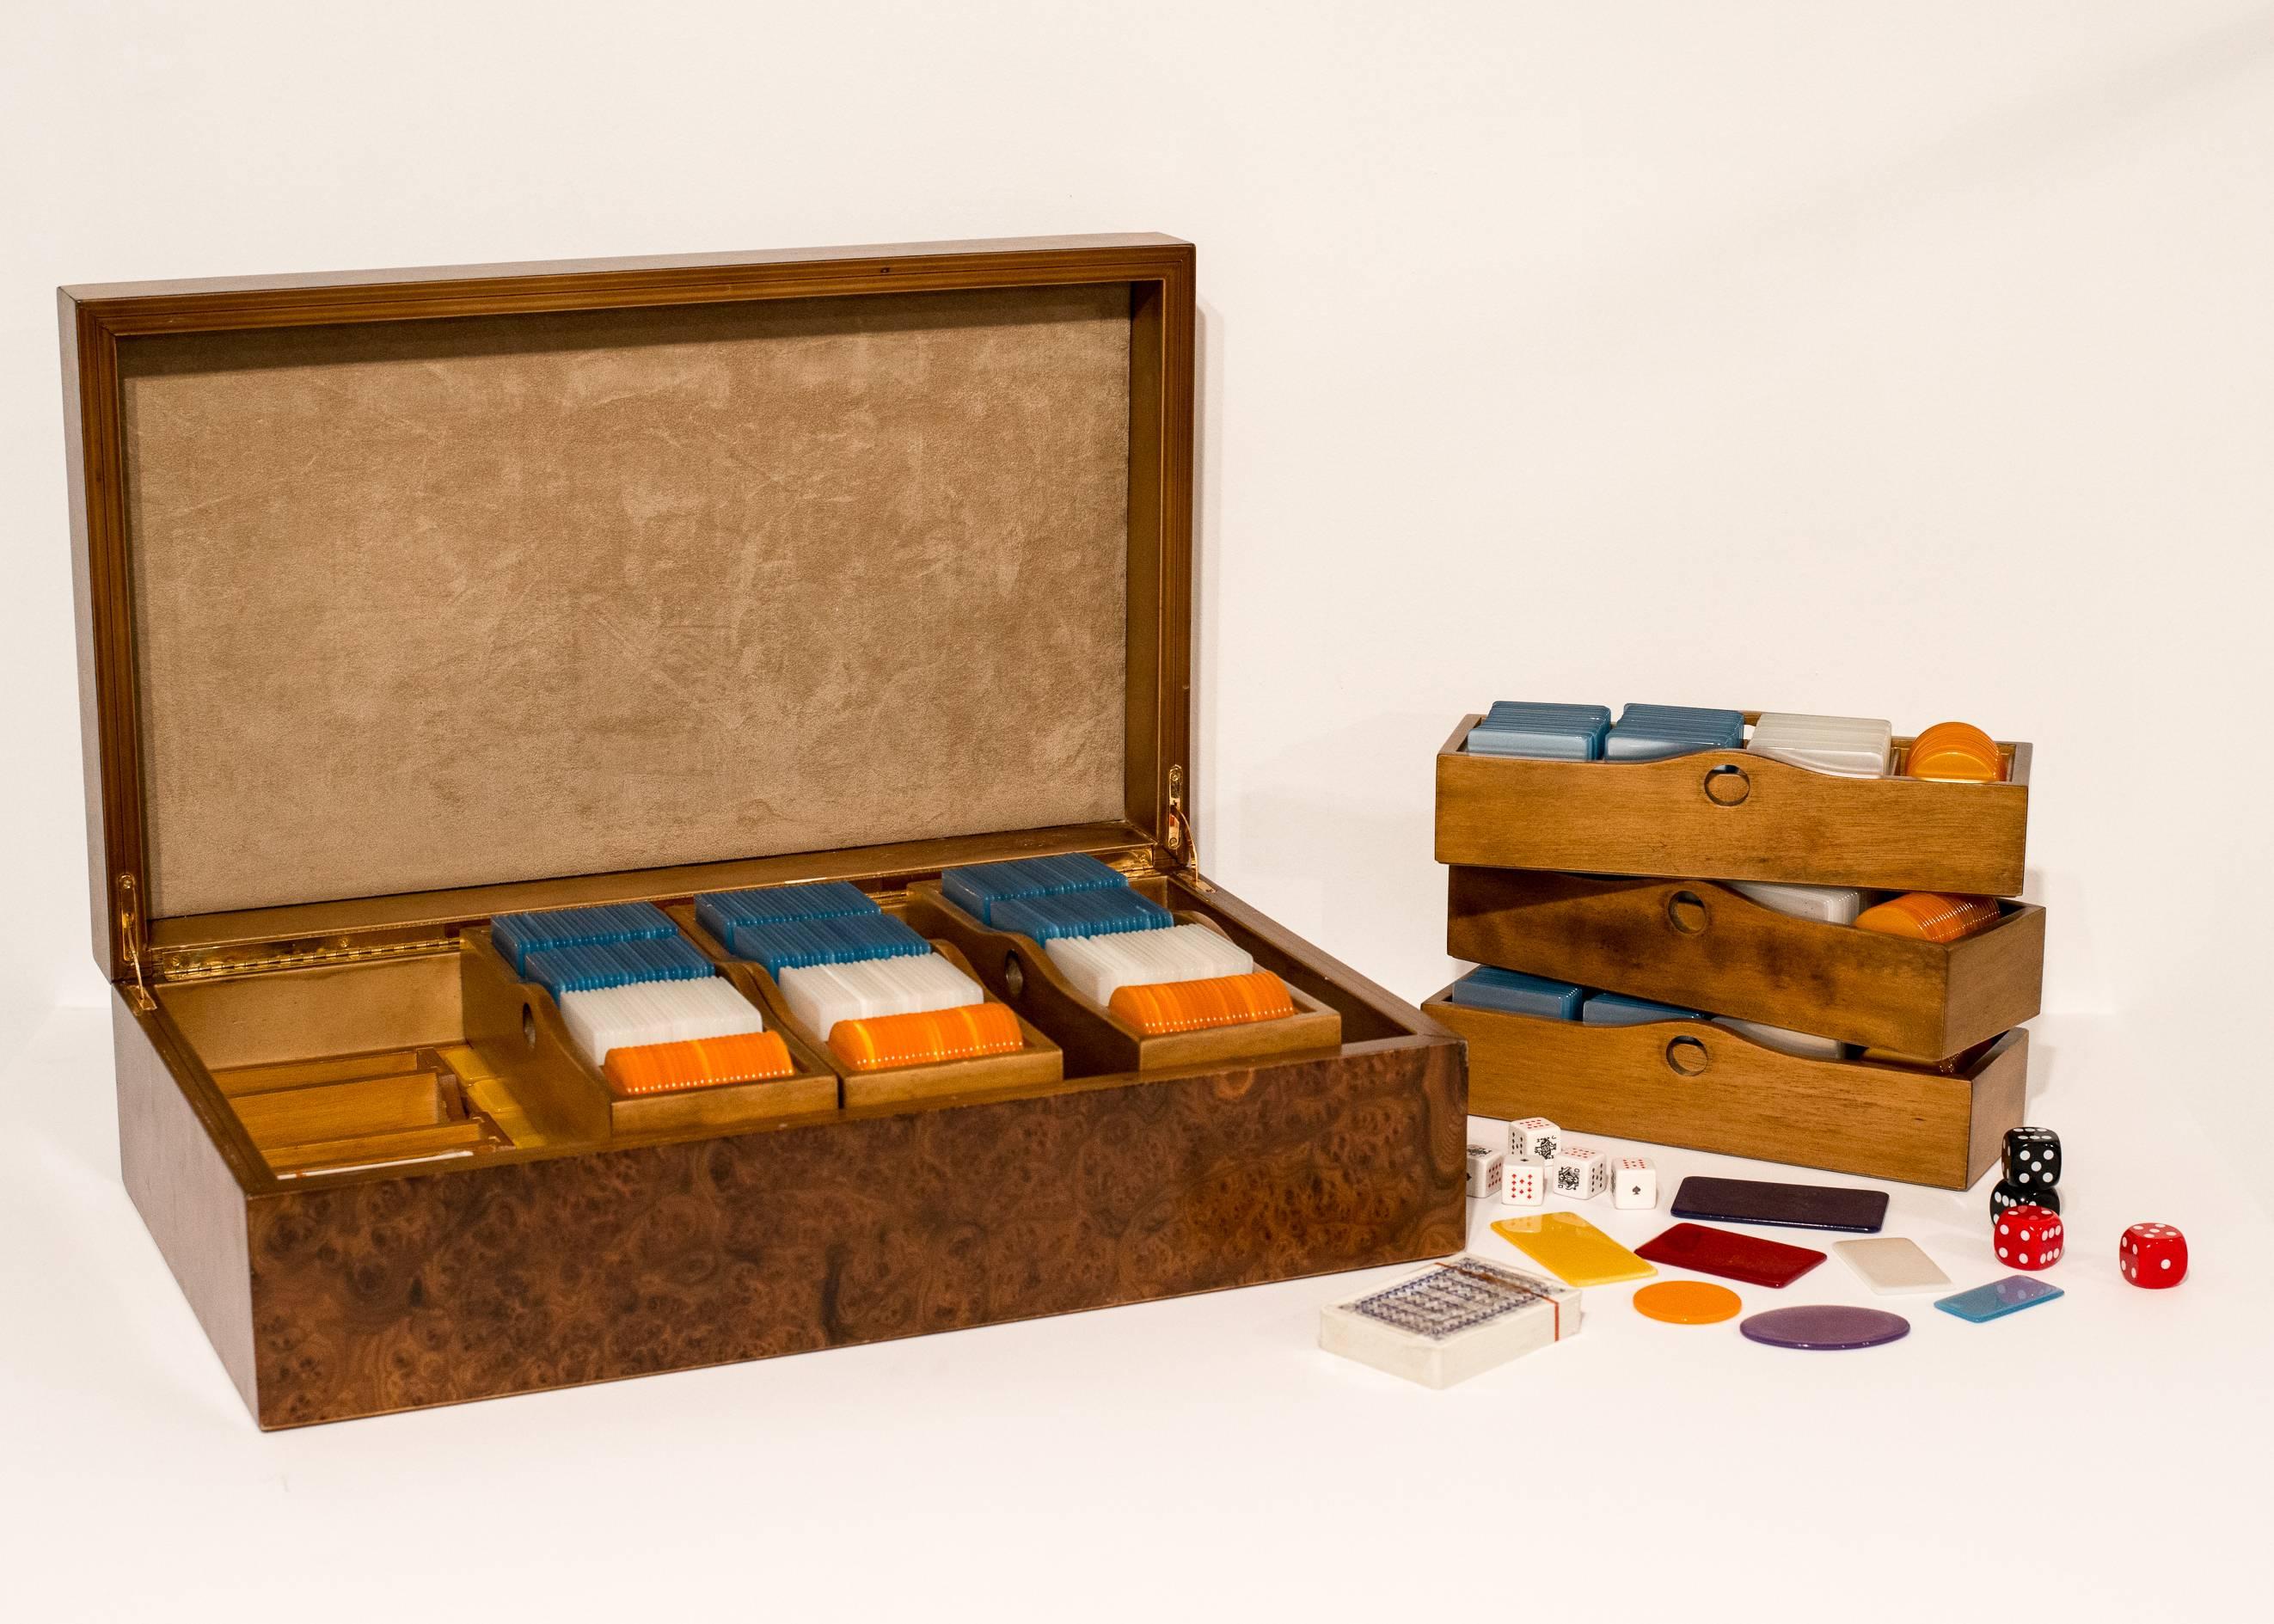 Luxurious 1970s velvet lined briar wood cases opens to reveal a Florentine Italian poker game set. Each case fitted with five trays and compartmentalized base holding approximate 685 unmarked pearlized or iridescent acrylic European style poker